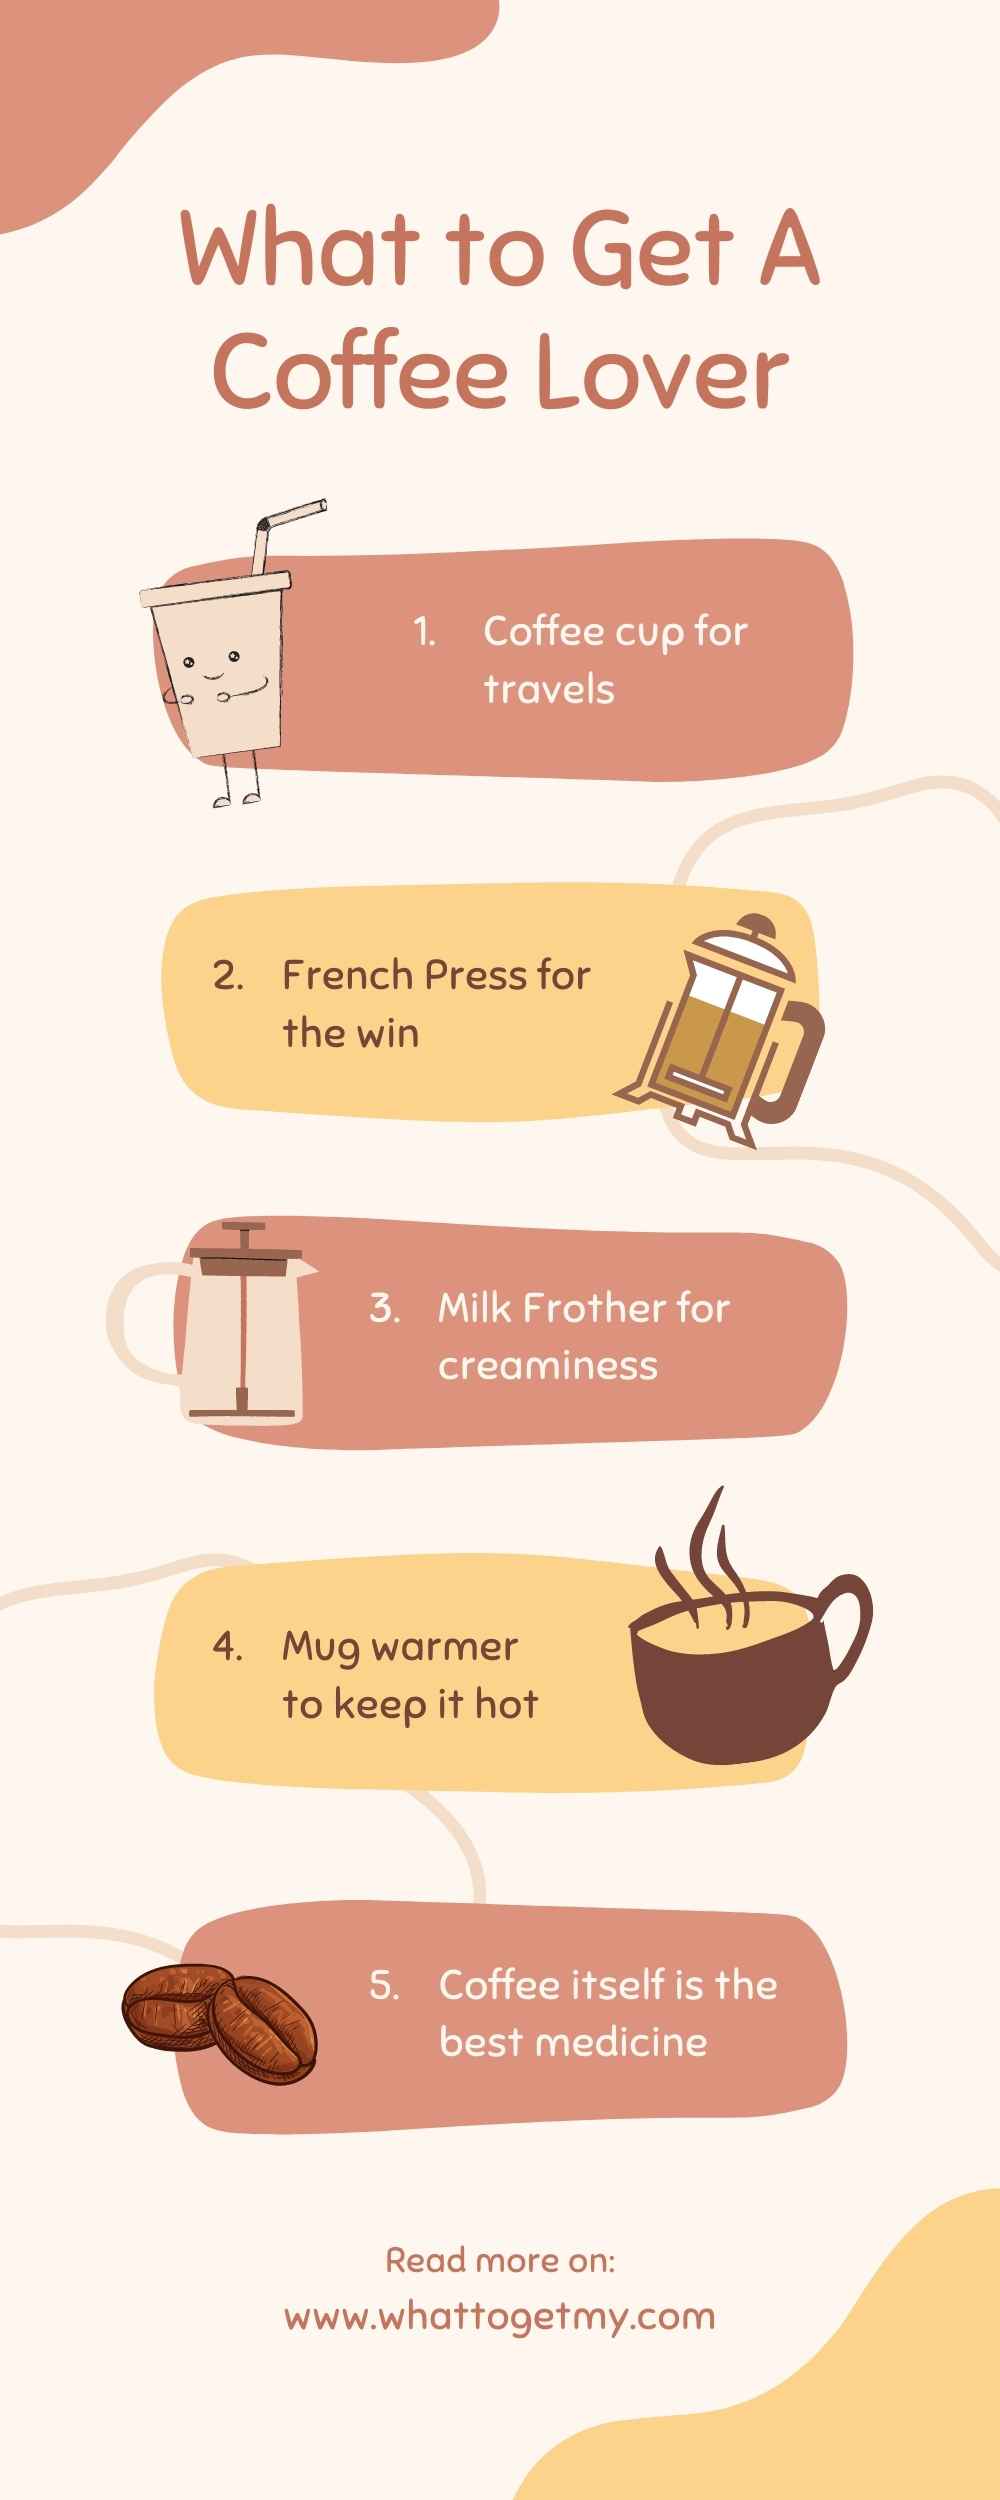 What to Get A Coffee Lover